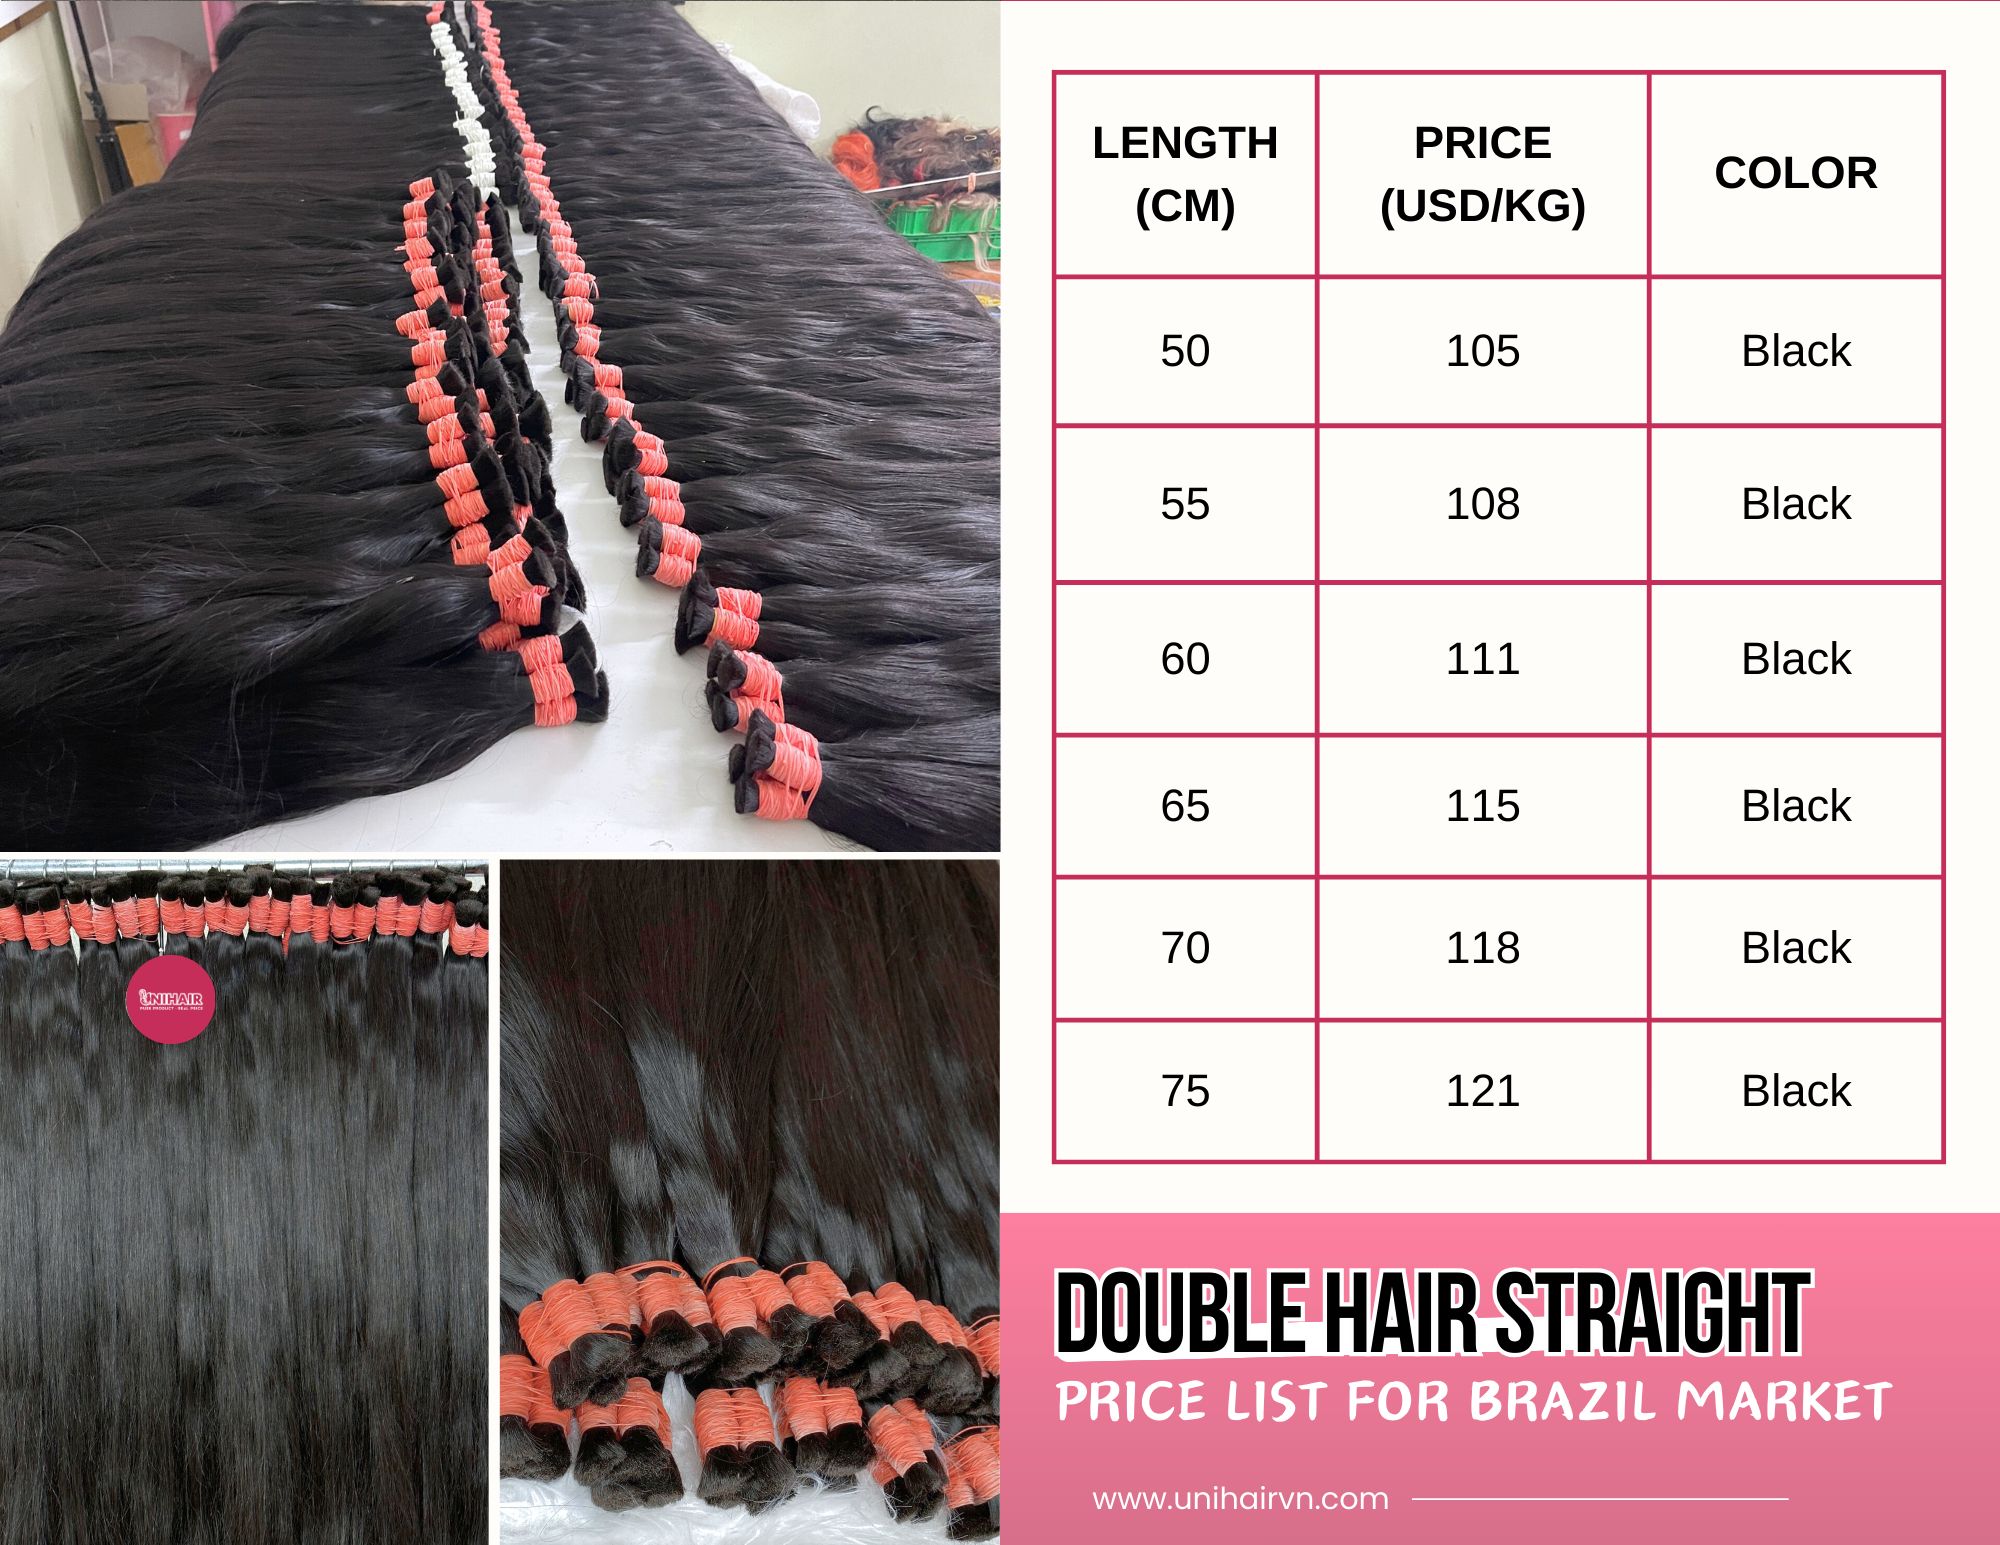 Cabelos Humanos Vietnamita for Brazil - double hair staight